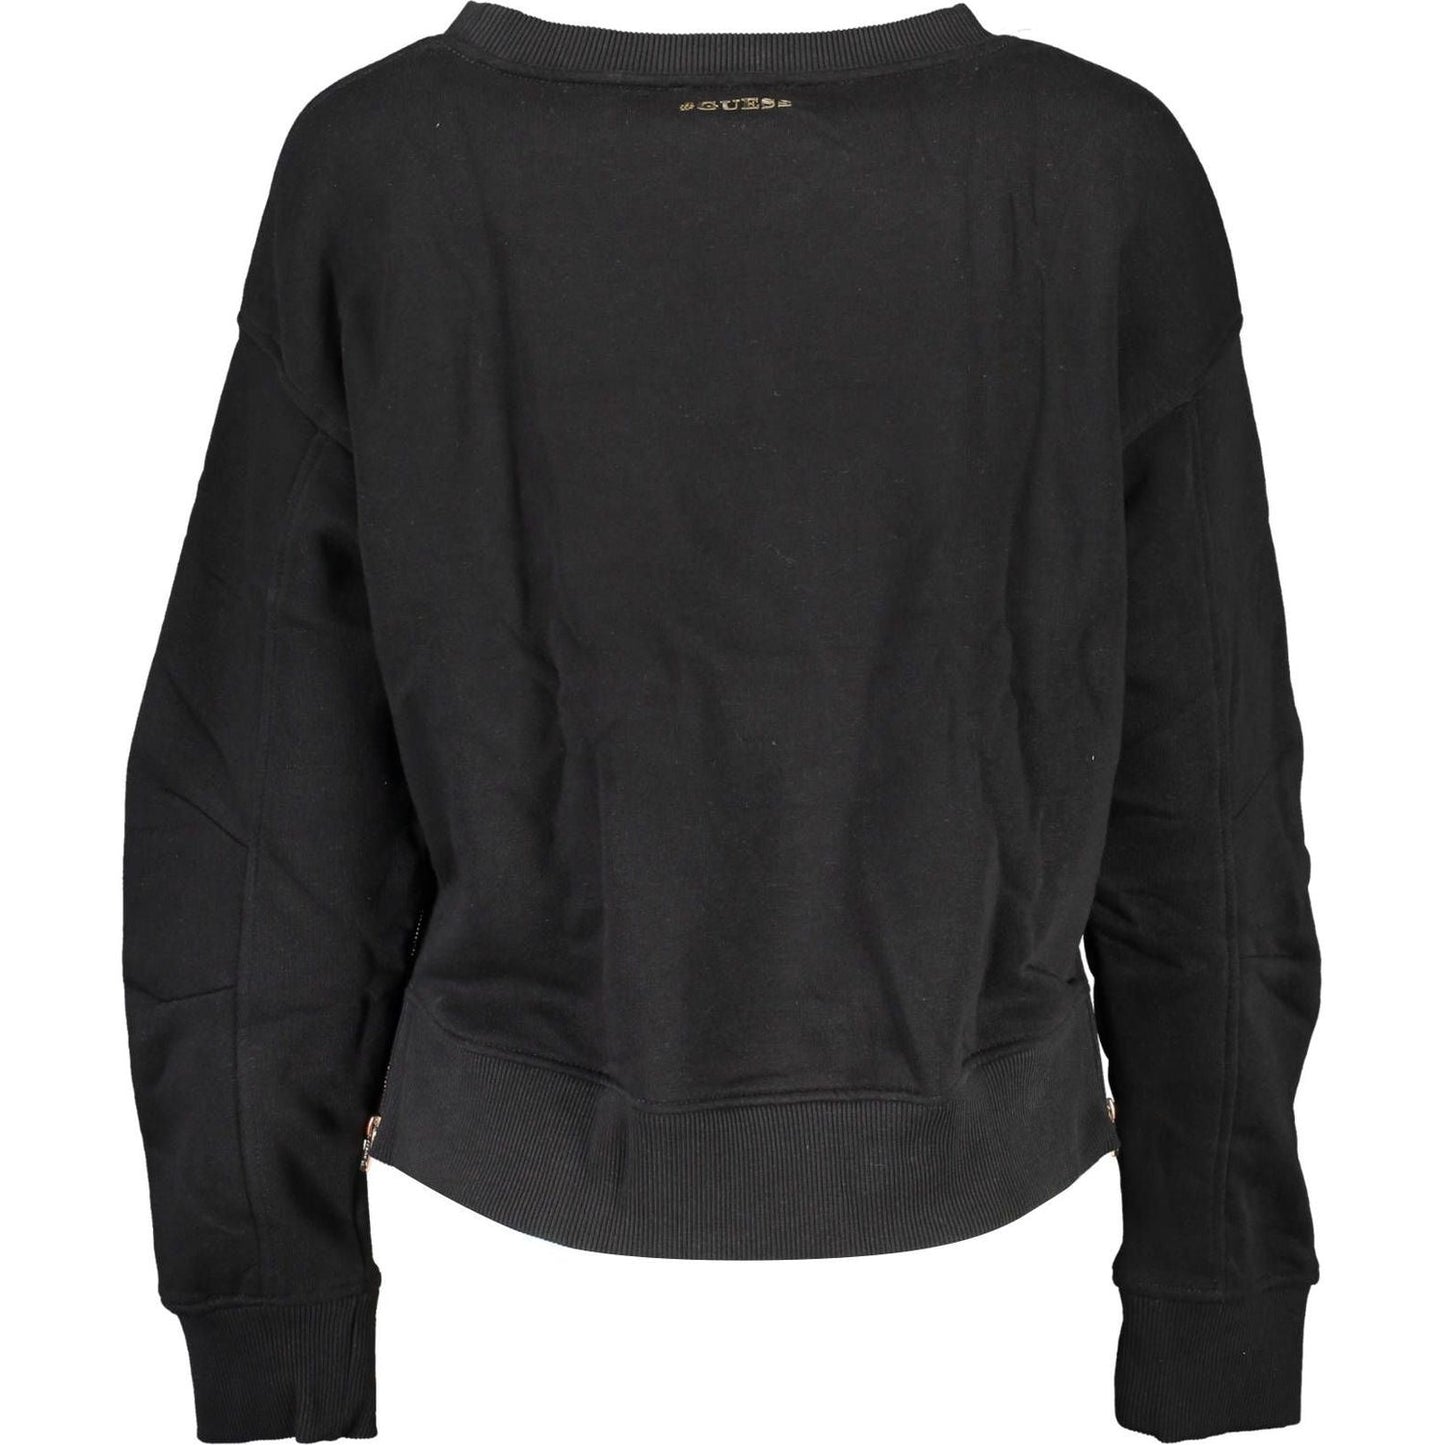 Guess JeansElegant Long-Sleeved Sweater with Chic Side ZipsMcRichard Designer Brands£99.00